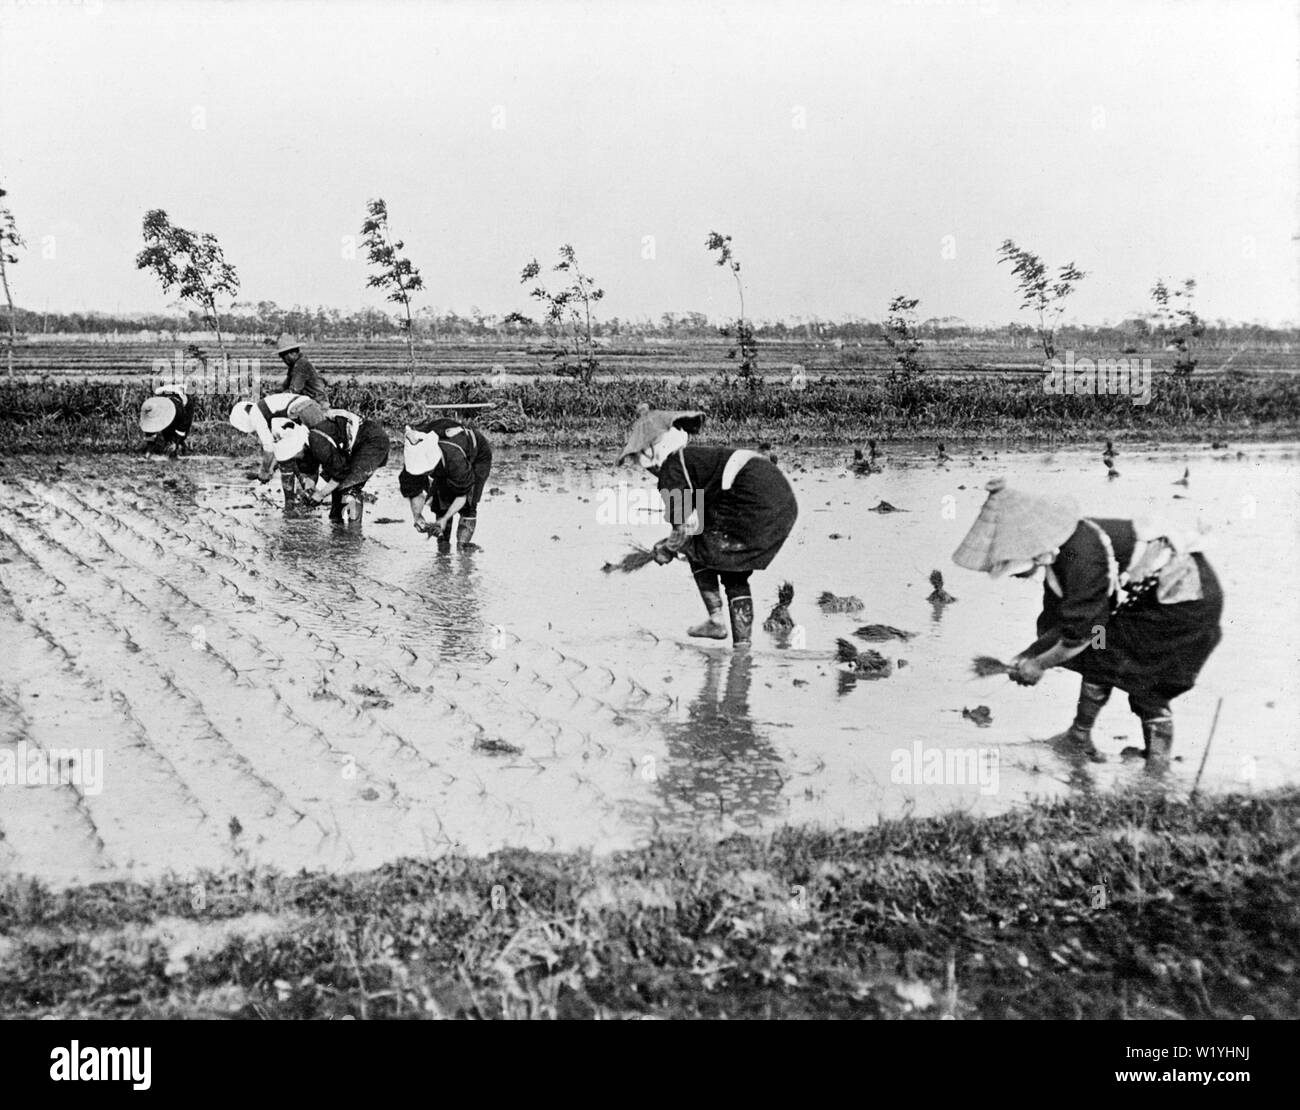 [ 1930s Japan - Farmers Planting Rice ] —   Women in traditional clothing are transplanting rice seedlings. This process is called taue in Japanese.  20th century vintage glass slide. Stock Photo